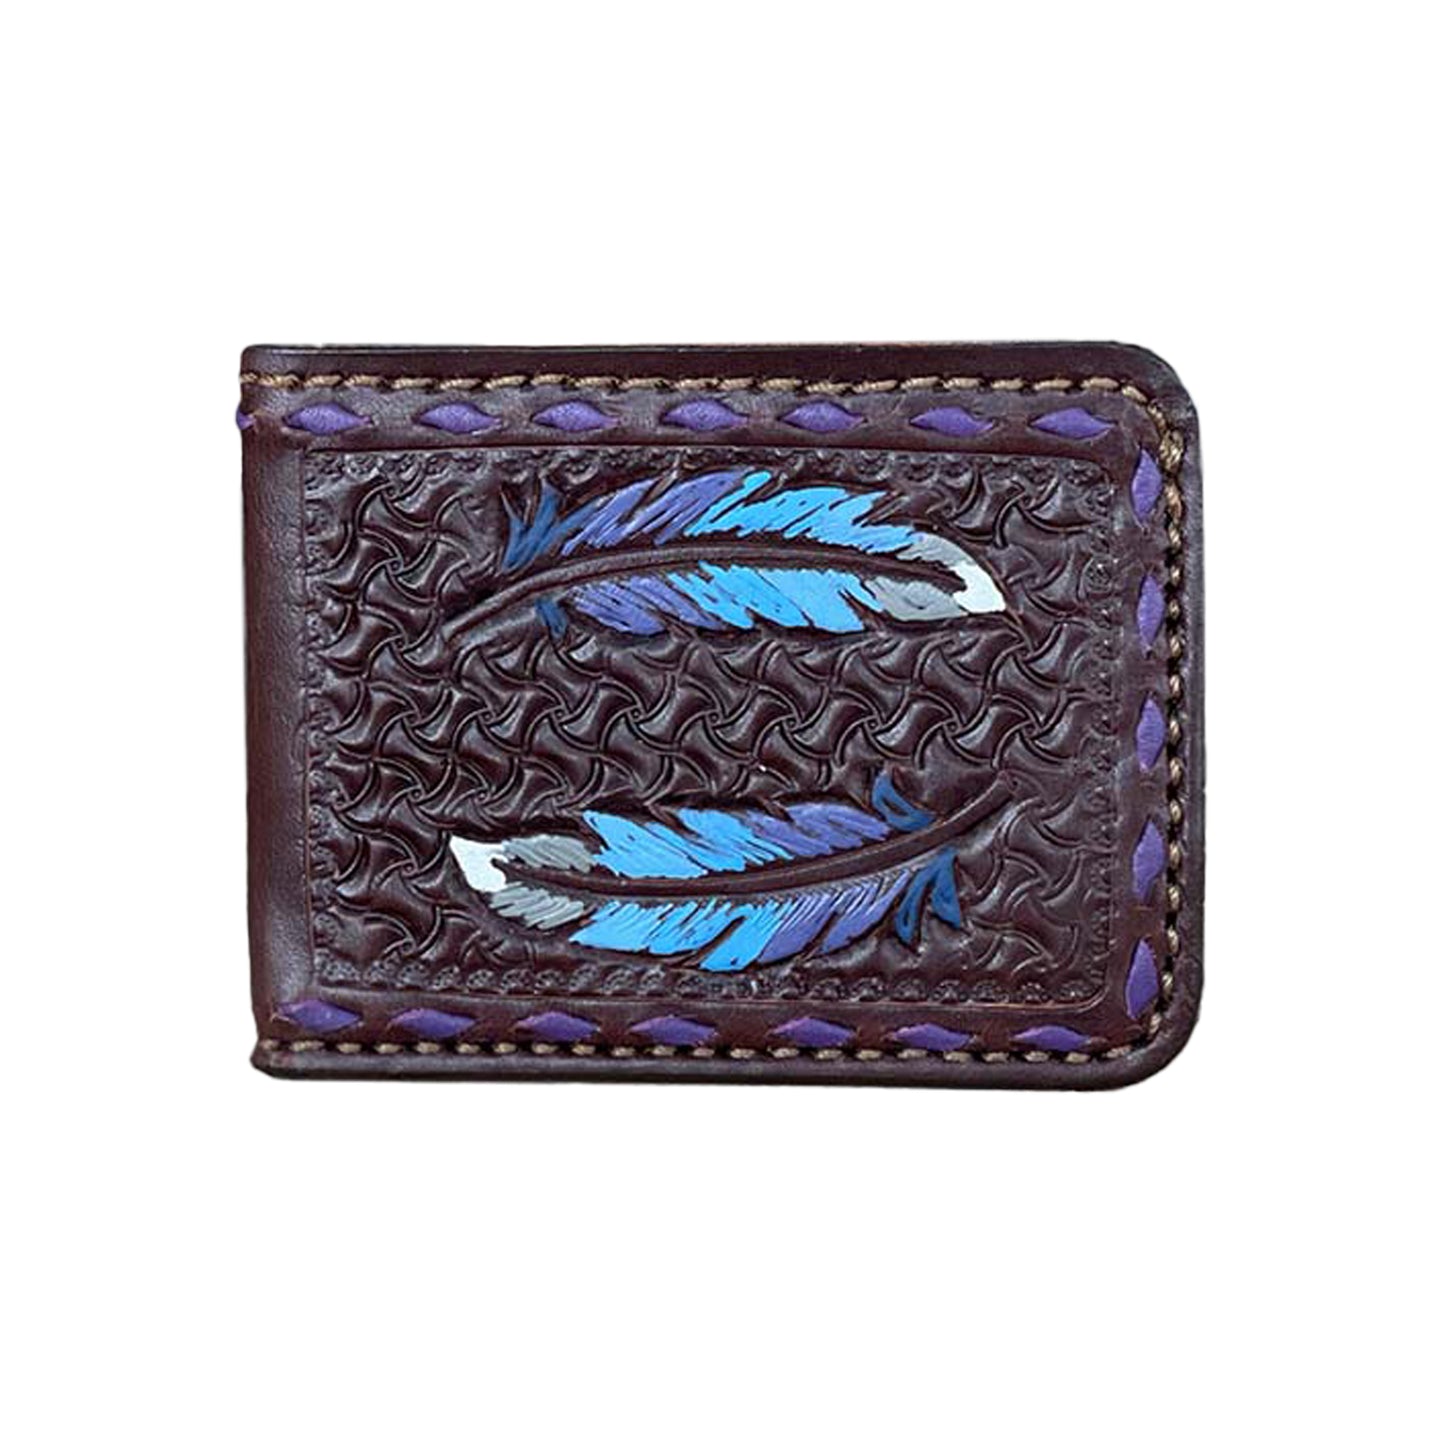 Bi-fold wallet chocolate leather feather tooling